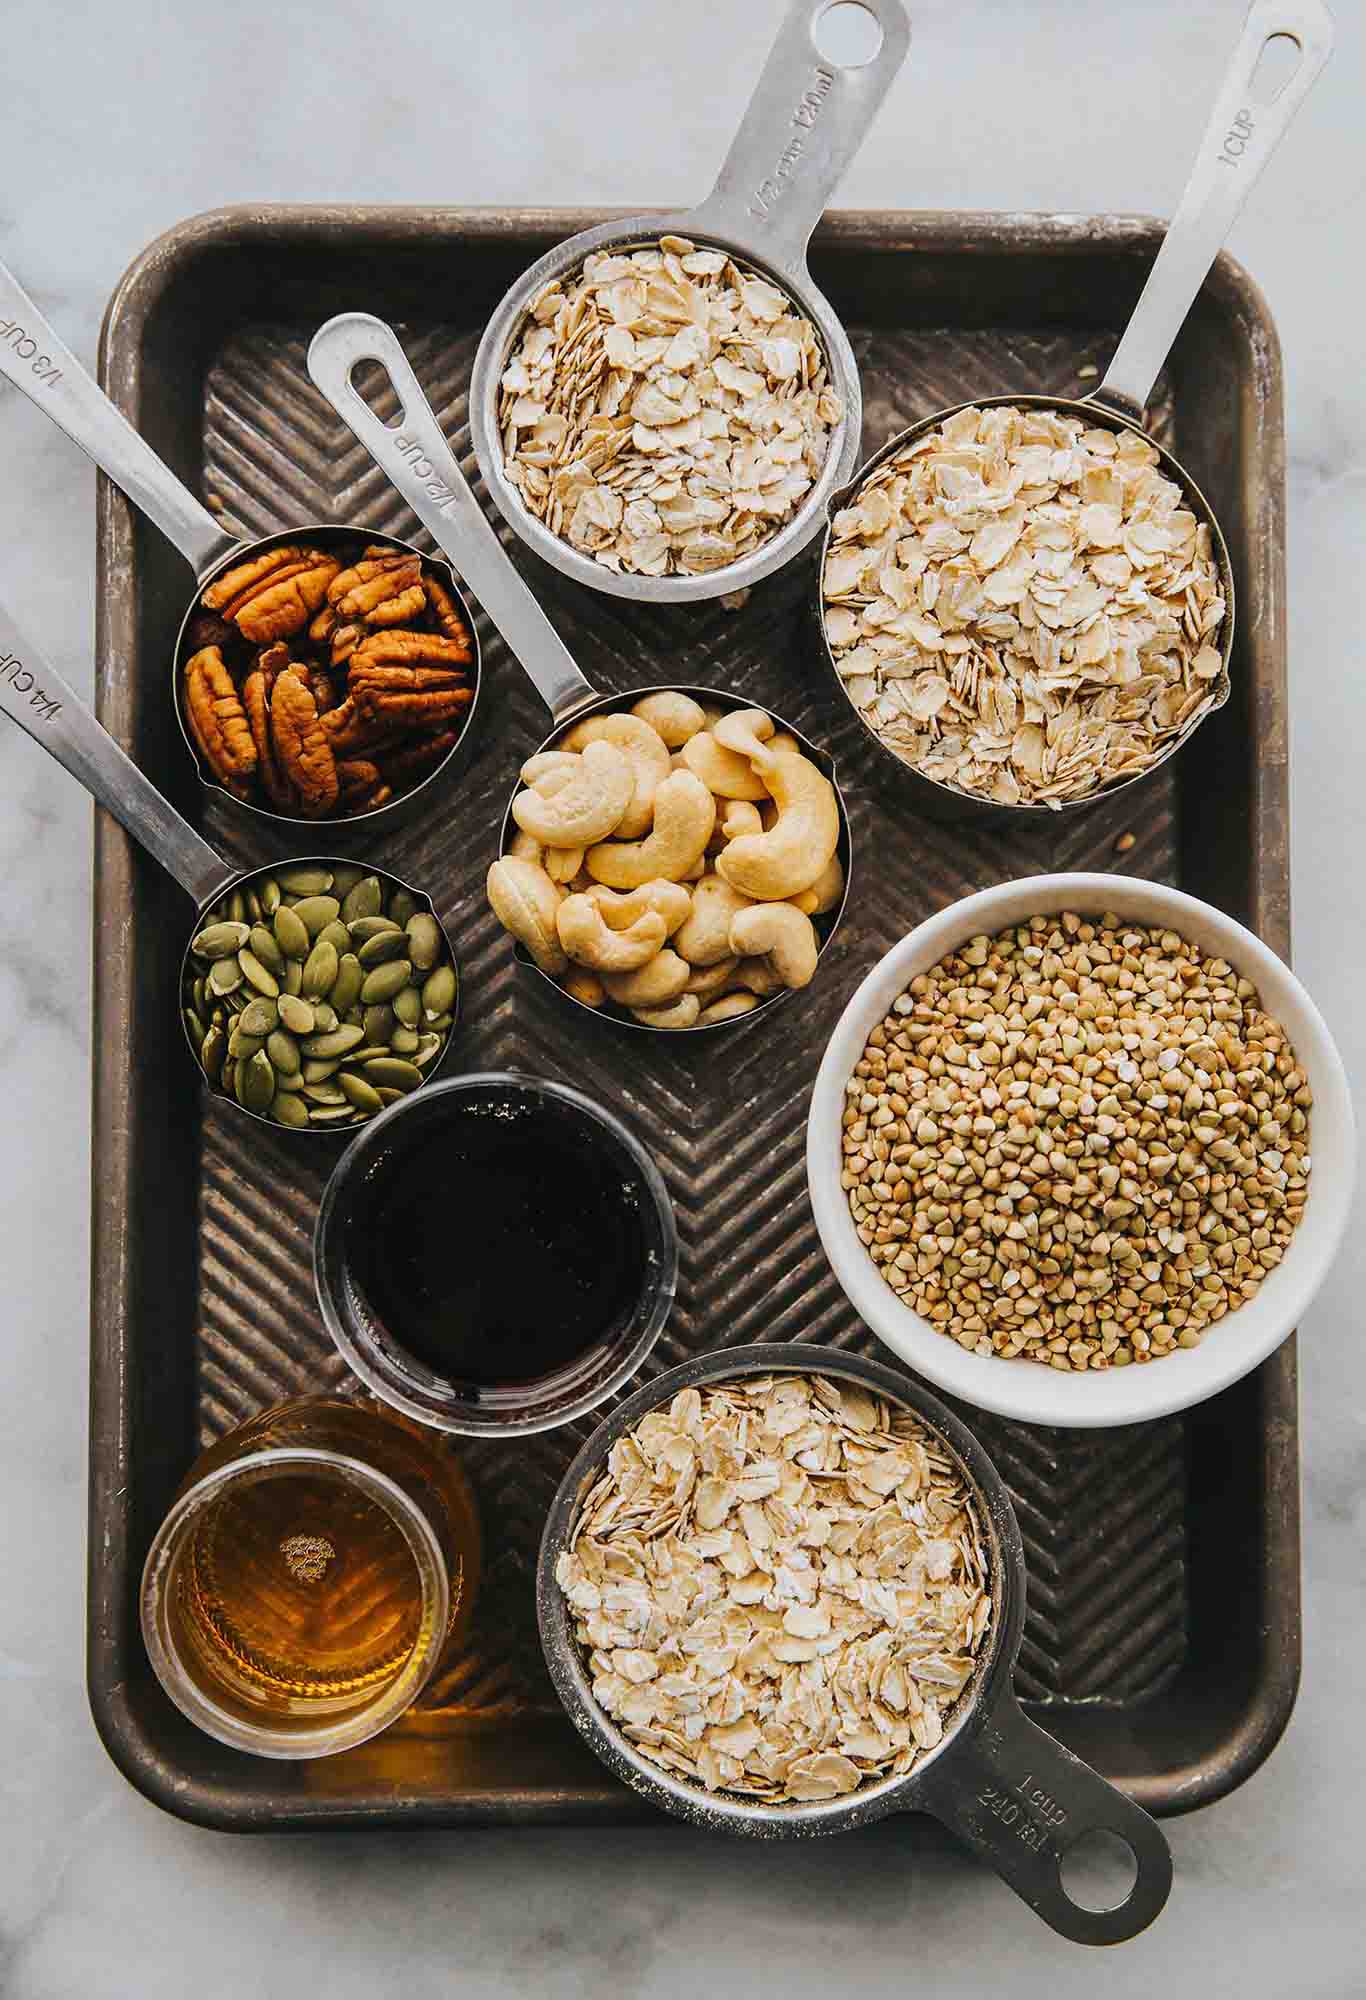 A tray with nuts, seeds and other foods on it.